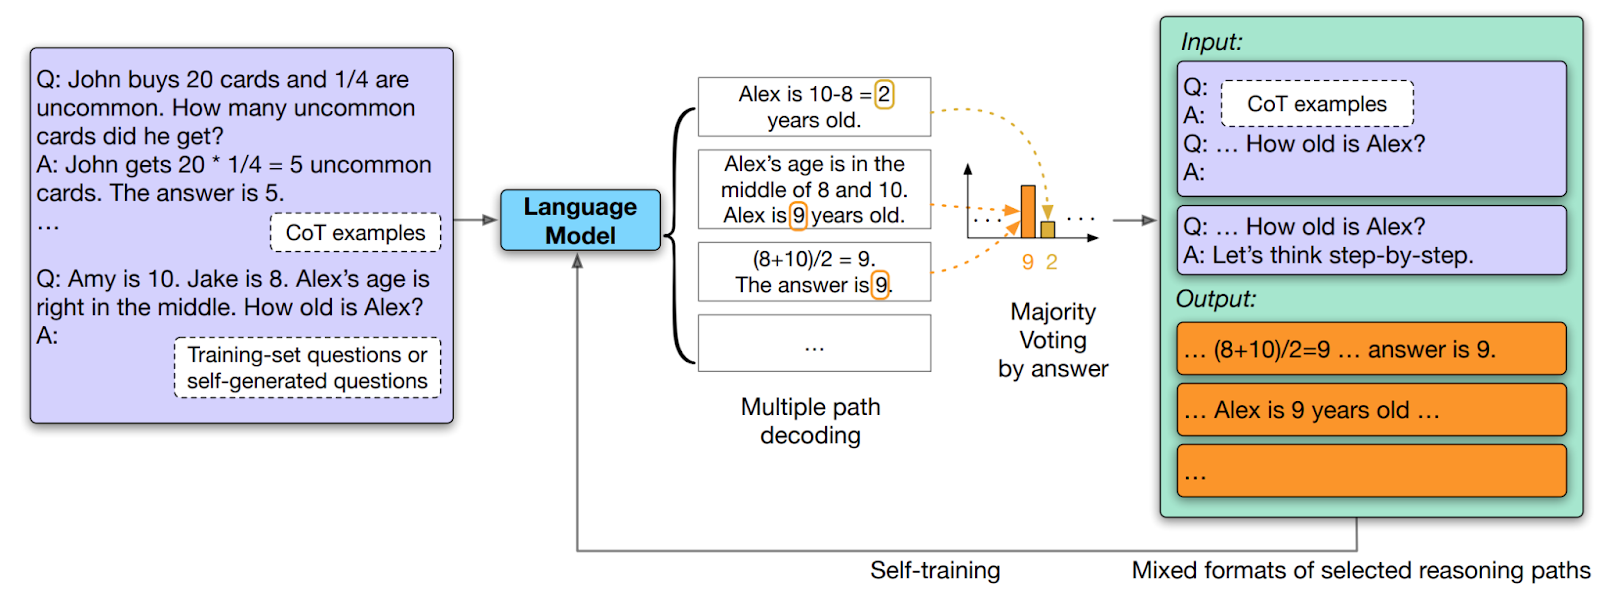 Diagram of machine learning model training, with examples of input questions and reasoning paths